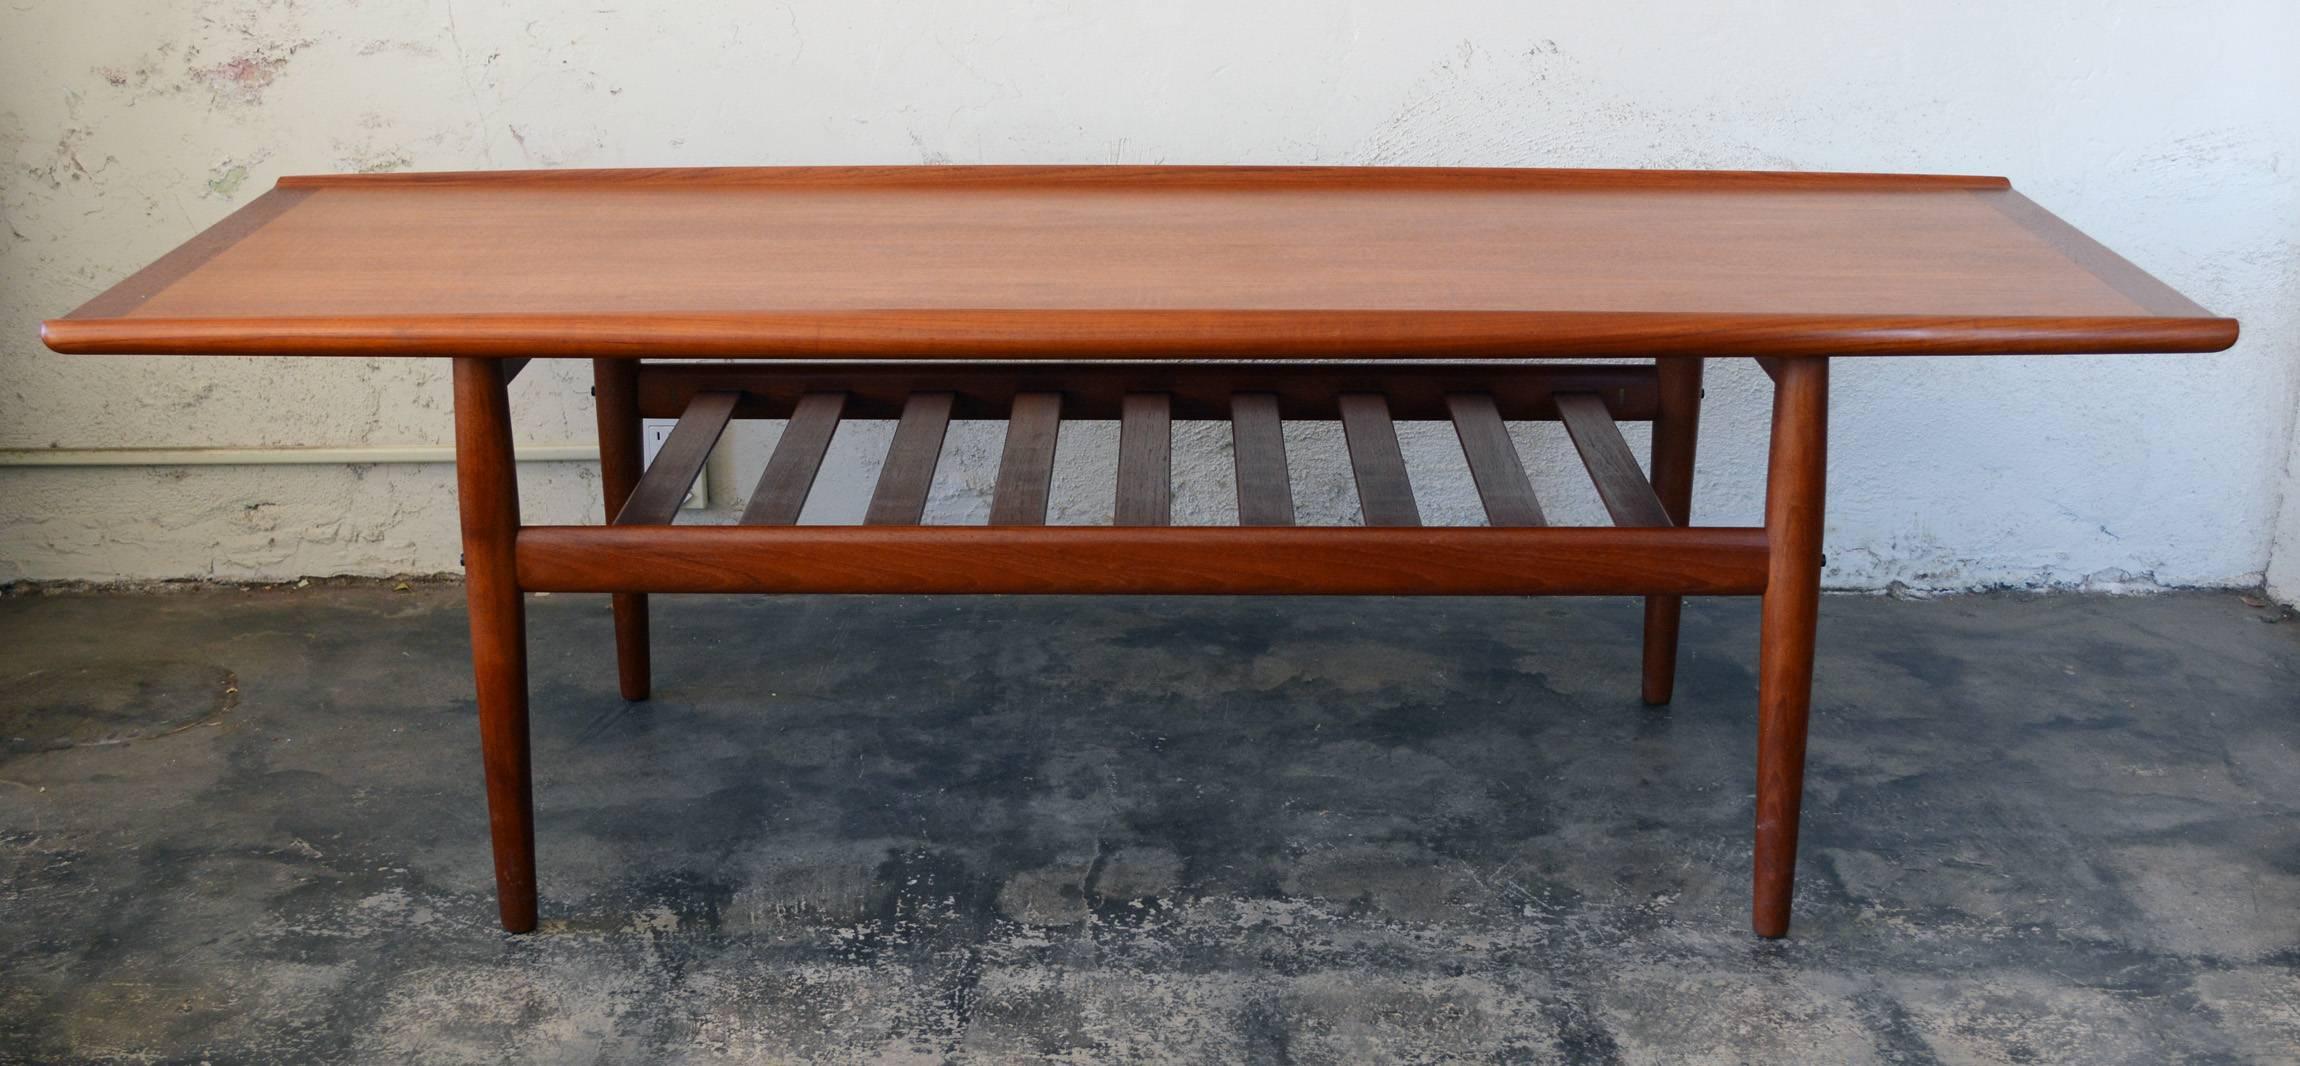 Long Mid-Century teak coffee table designed by Grete Jalk for Glostrup. This has a slatted shelf below the top perfect for magazines or books. This table has it's original finish that shows minimal wear.